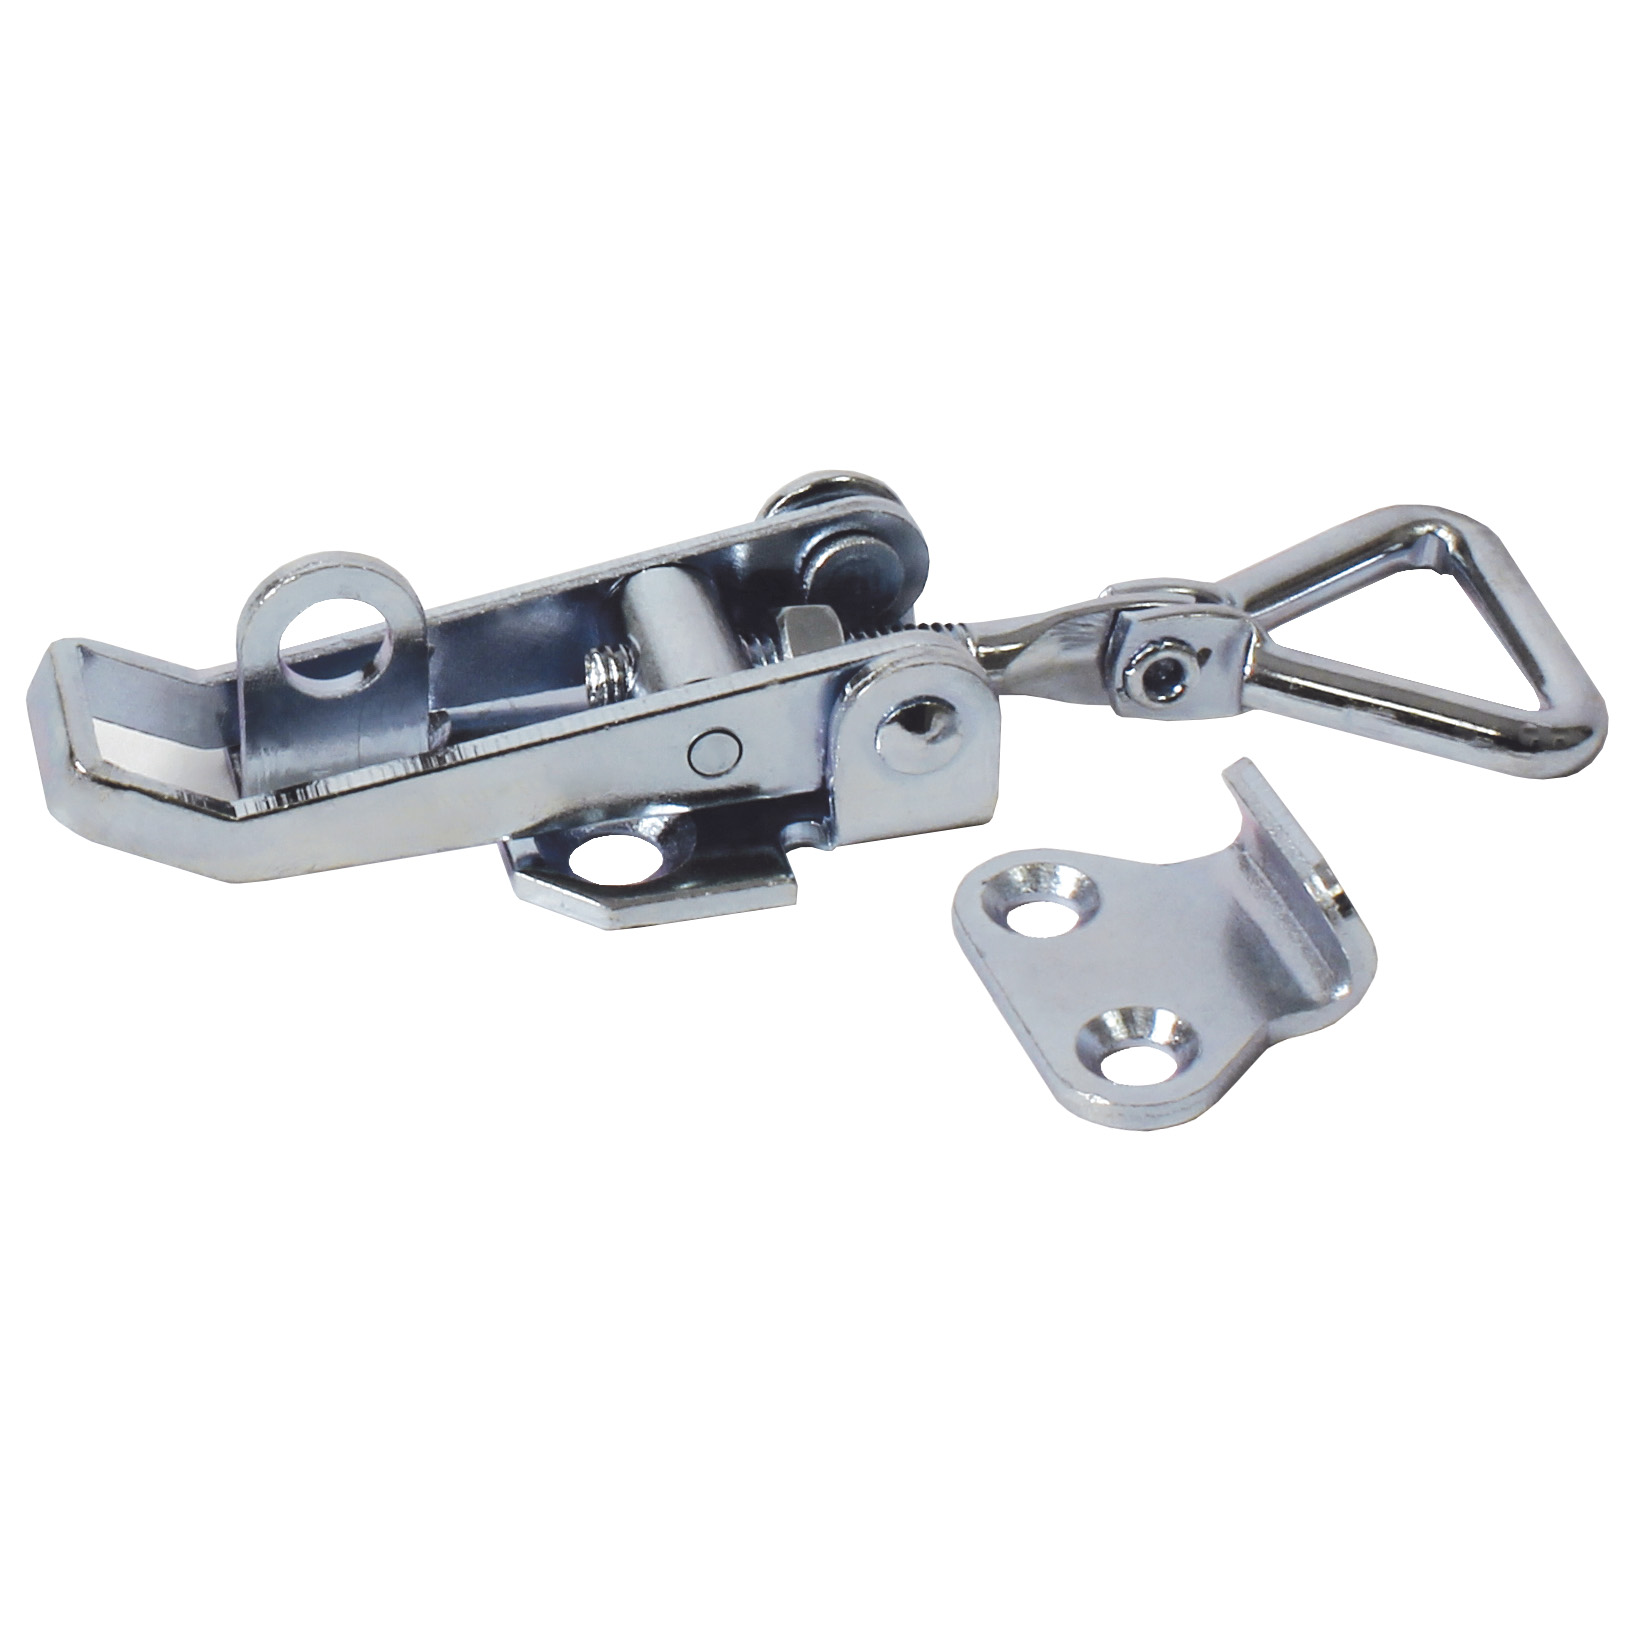 Adjustable latch clamp with strike plate - Stroke from 82mm to 92mm - With padlock holder - 